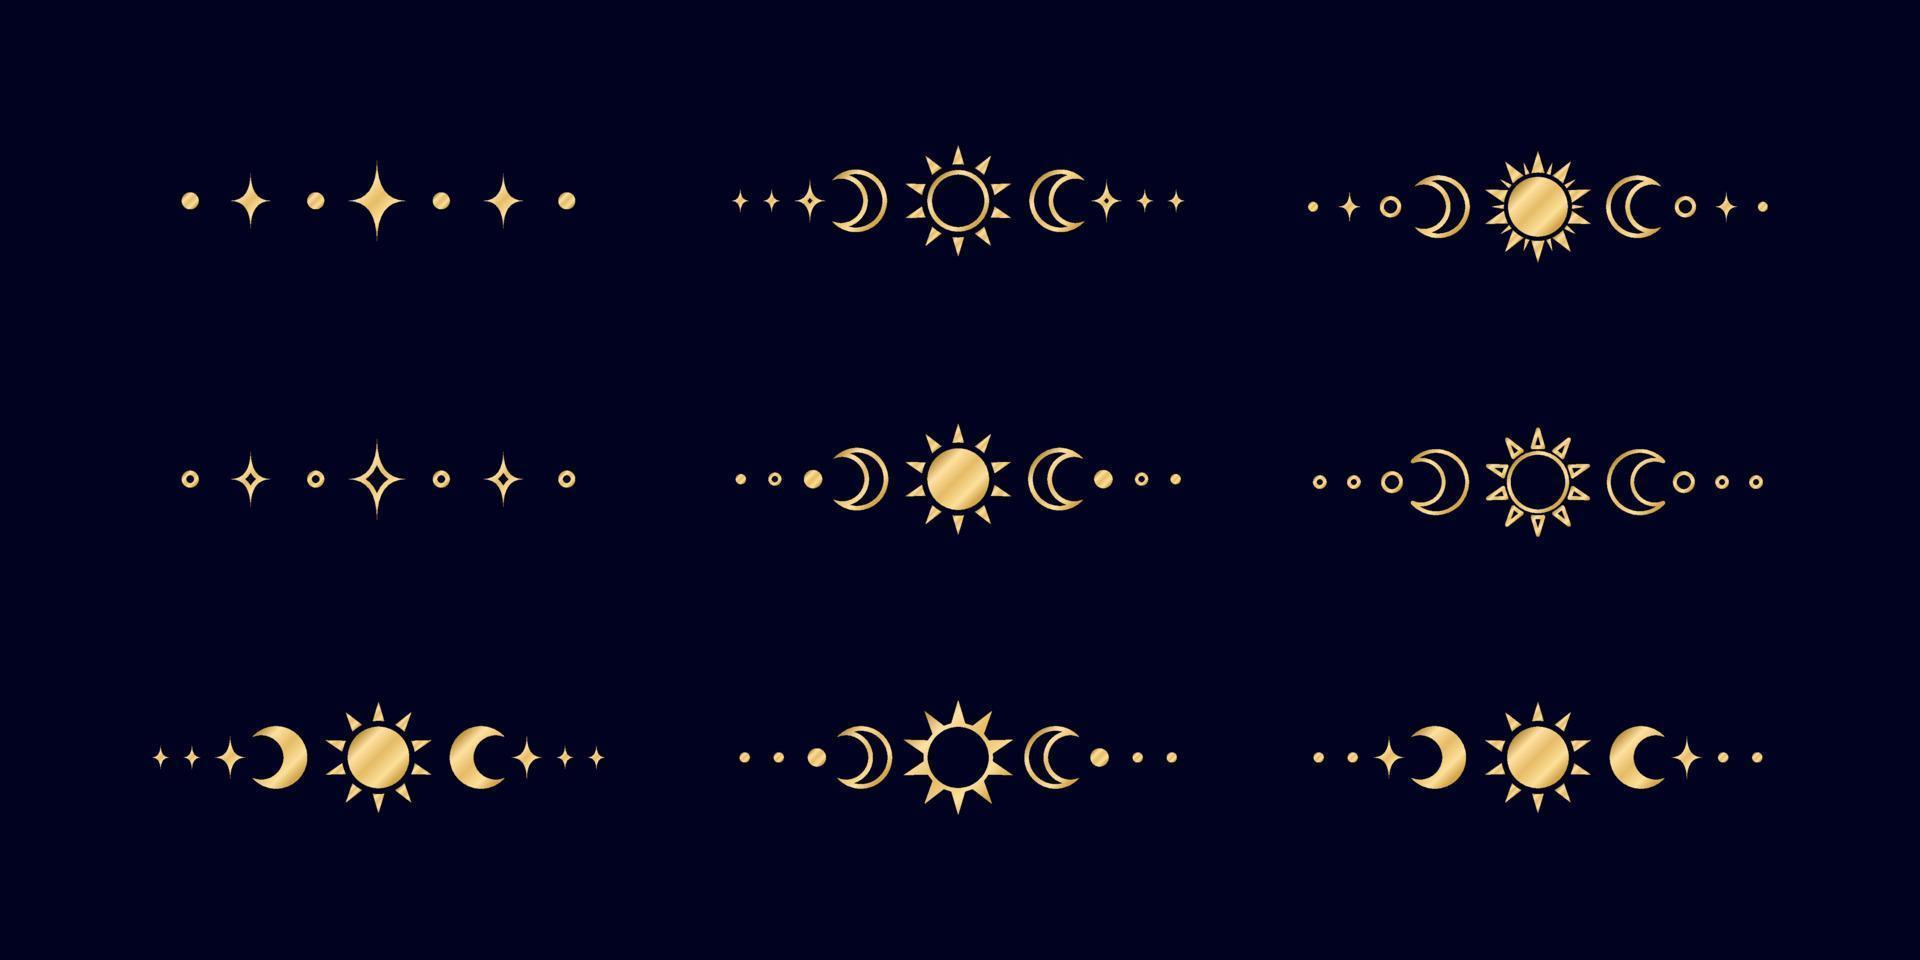 Gold celestial text divider with sun, stars, moon phases, crescents. Ornate boho mystic separator decorative element vector